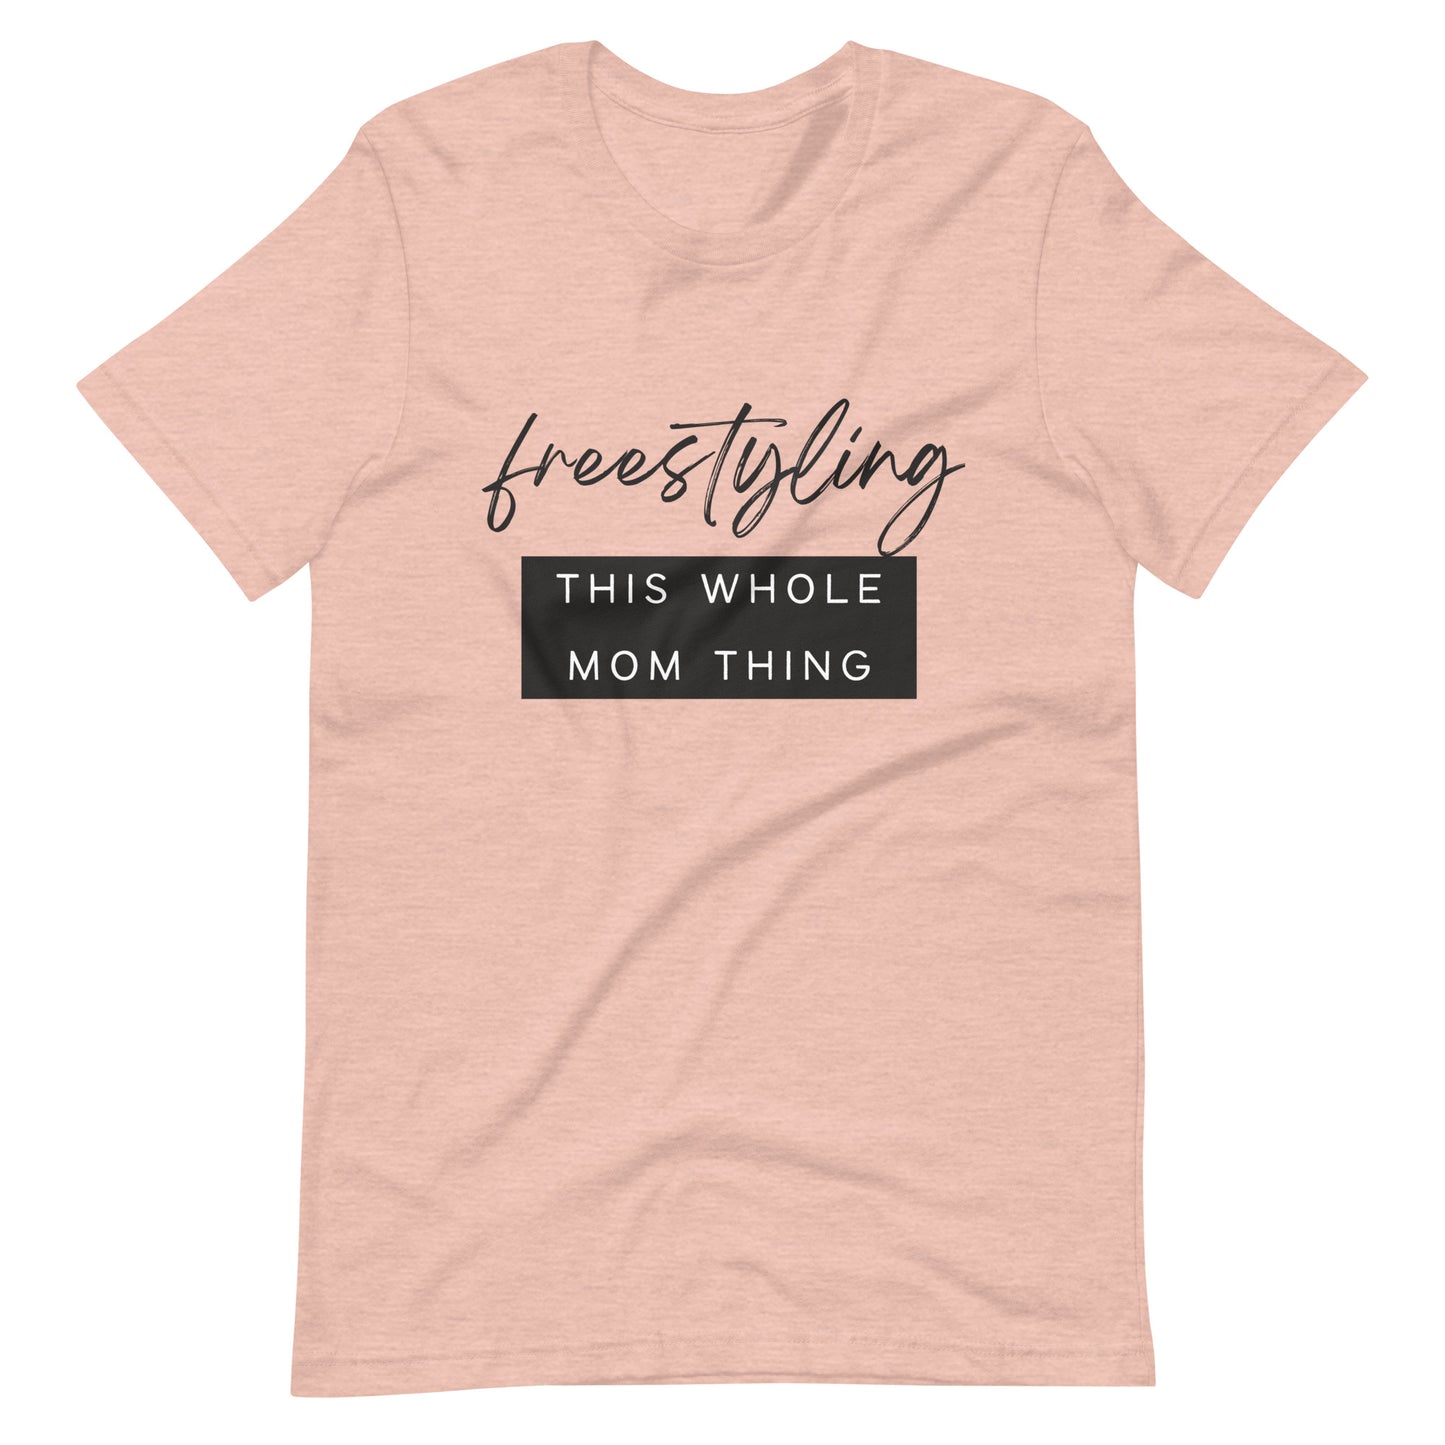 Freestyling This Whole Mom Thing  - Graphic Tee